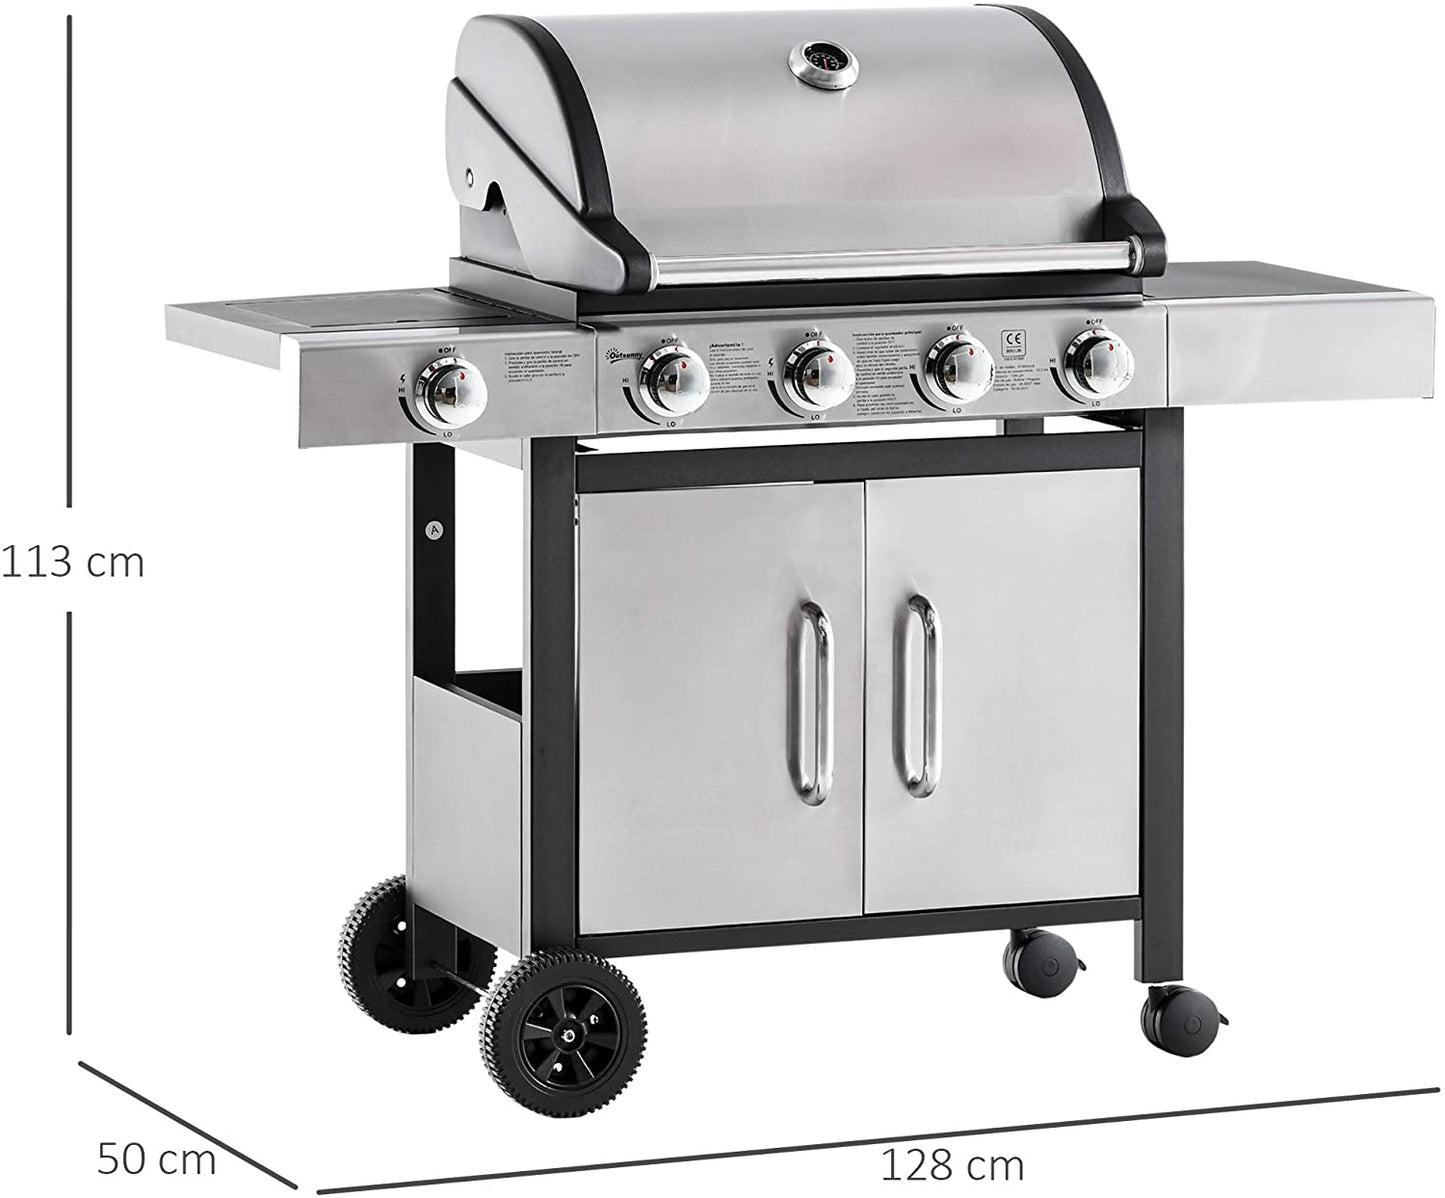 Outsunny Gas Barbecue Grill Deluxe 4+1 Burner Garden BBQ Large Cooking Area Side Burner